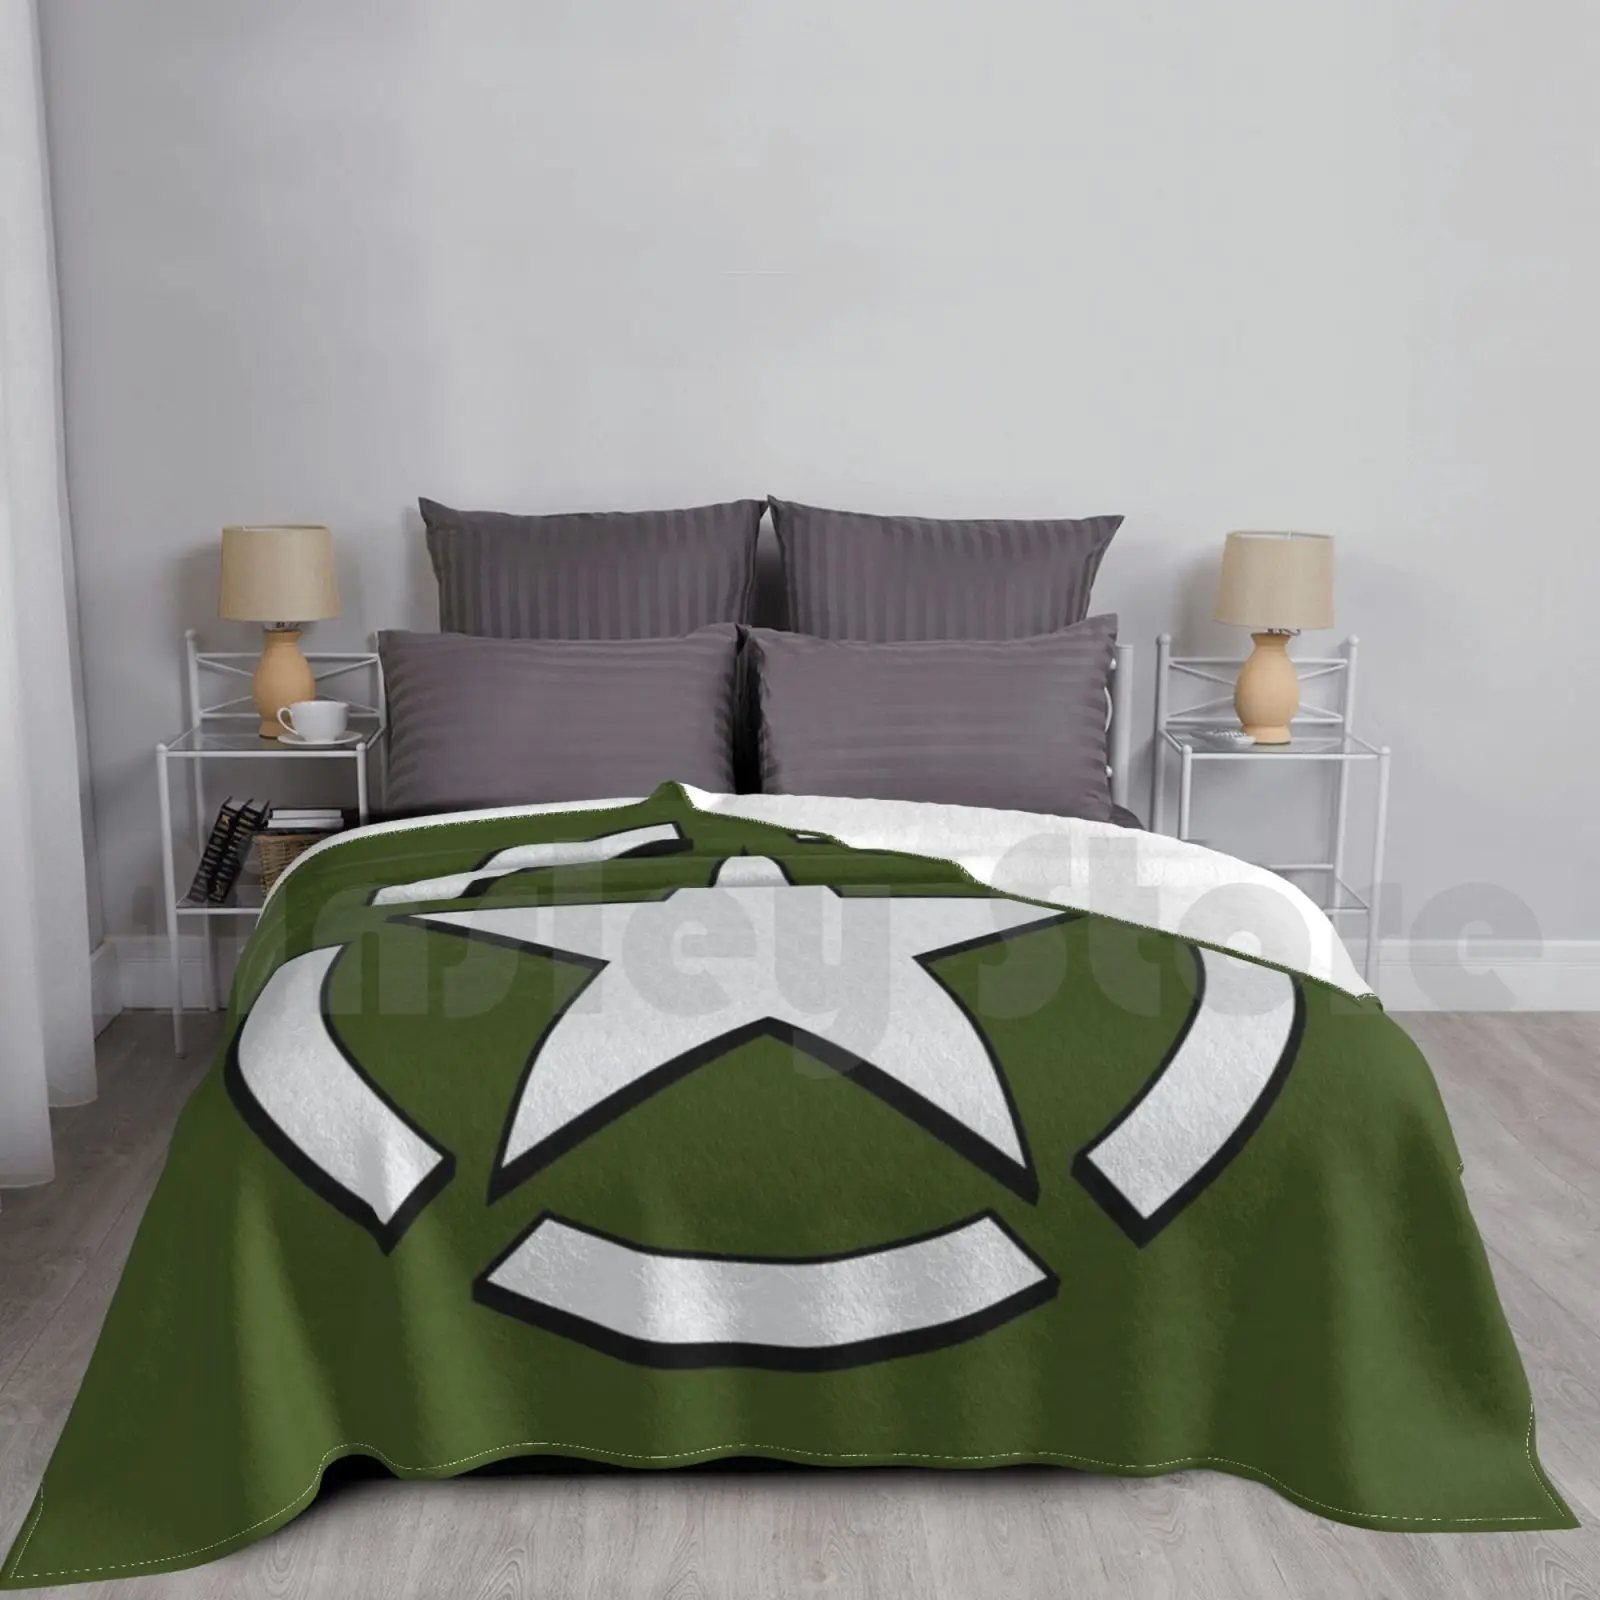 

Army Military Design Blanket Super Soft Warm Light Thin Military Army The Army Veteran Veterans Air Force Navy Army